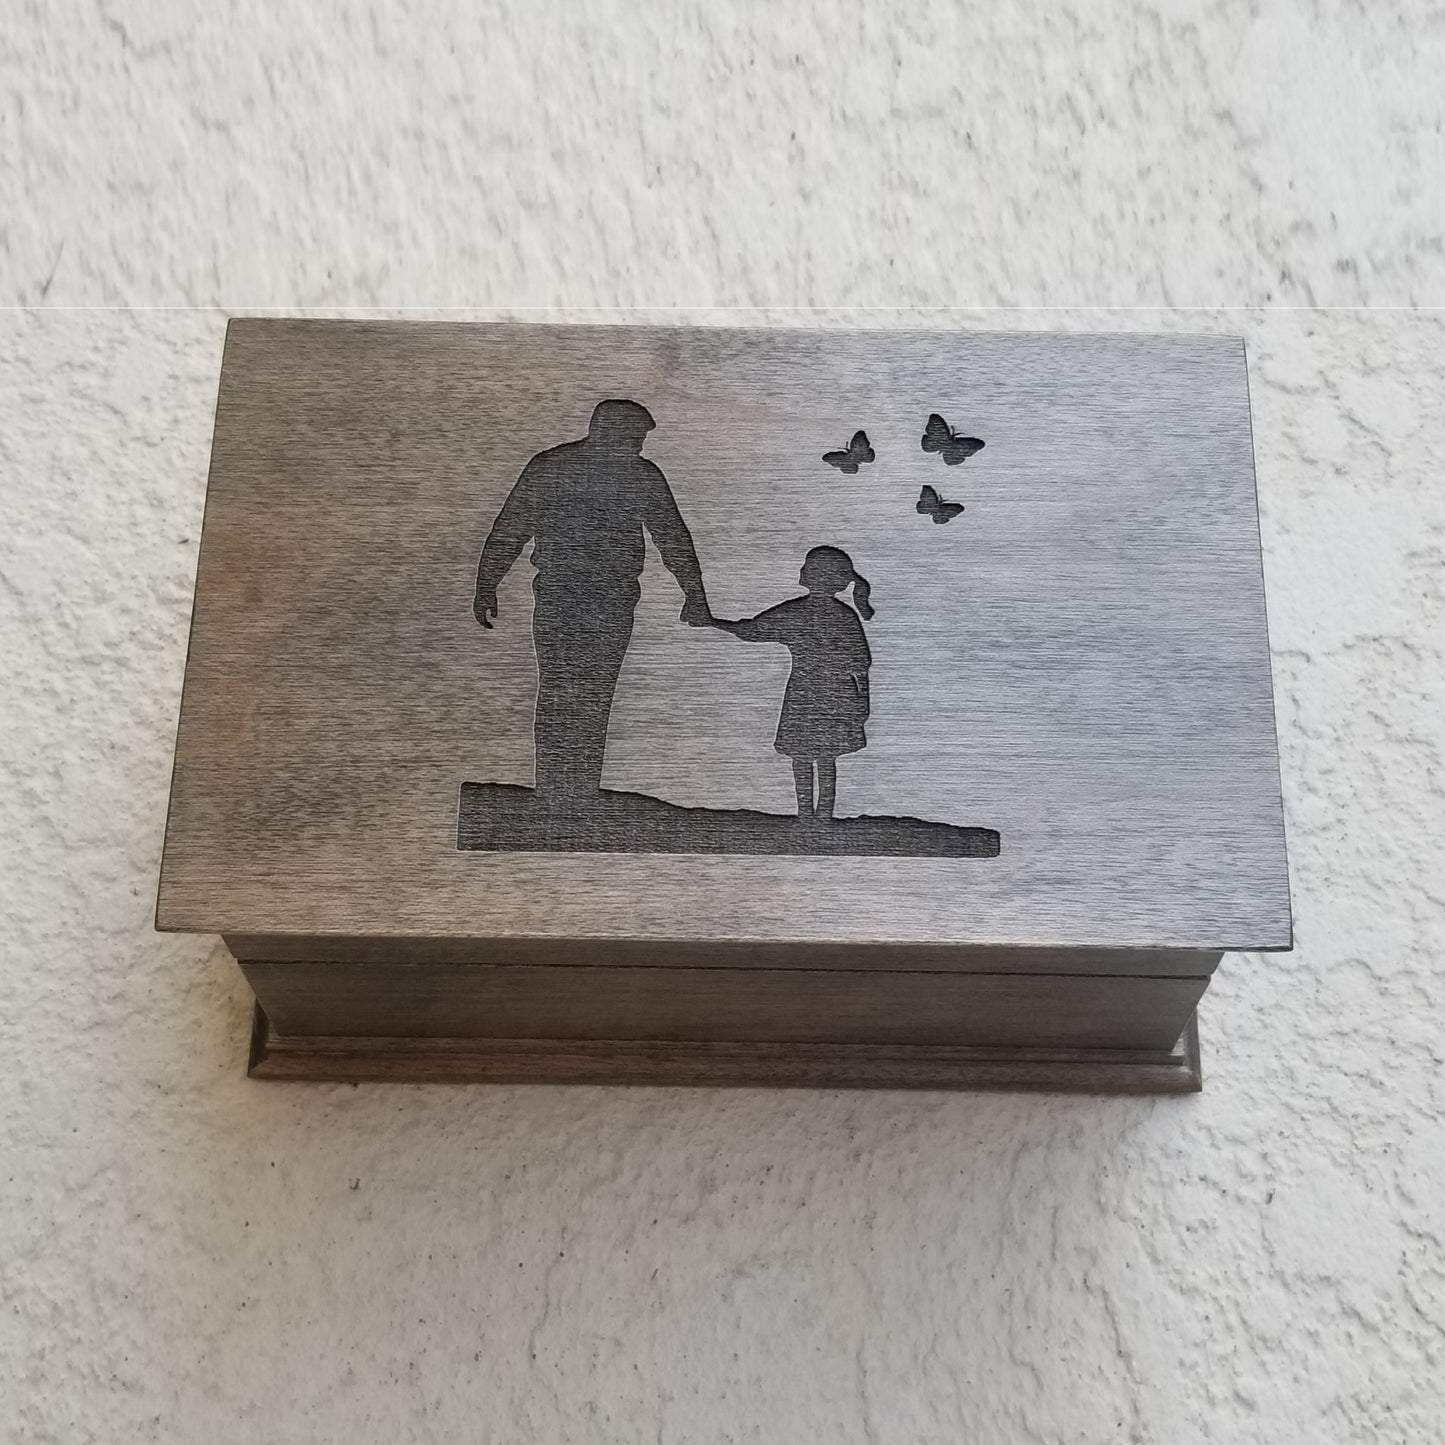 My Girl Music Jewelry Box with dad and daughter engraved on top